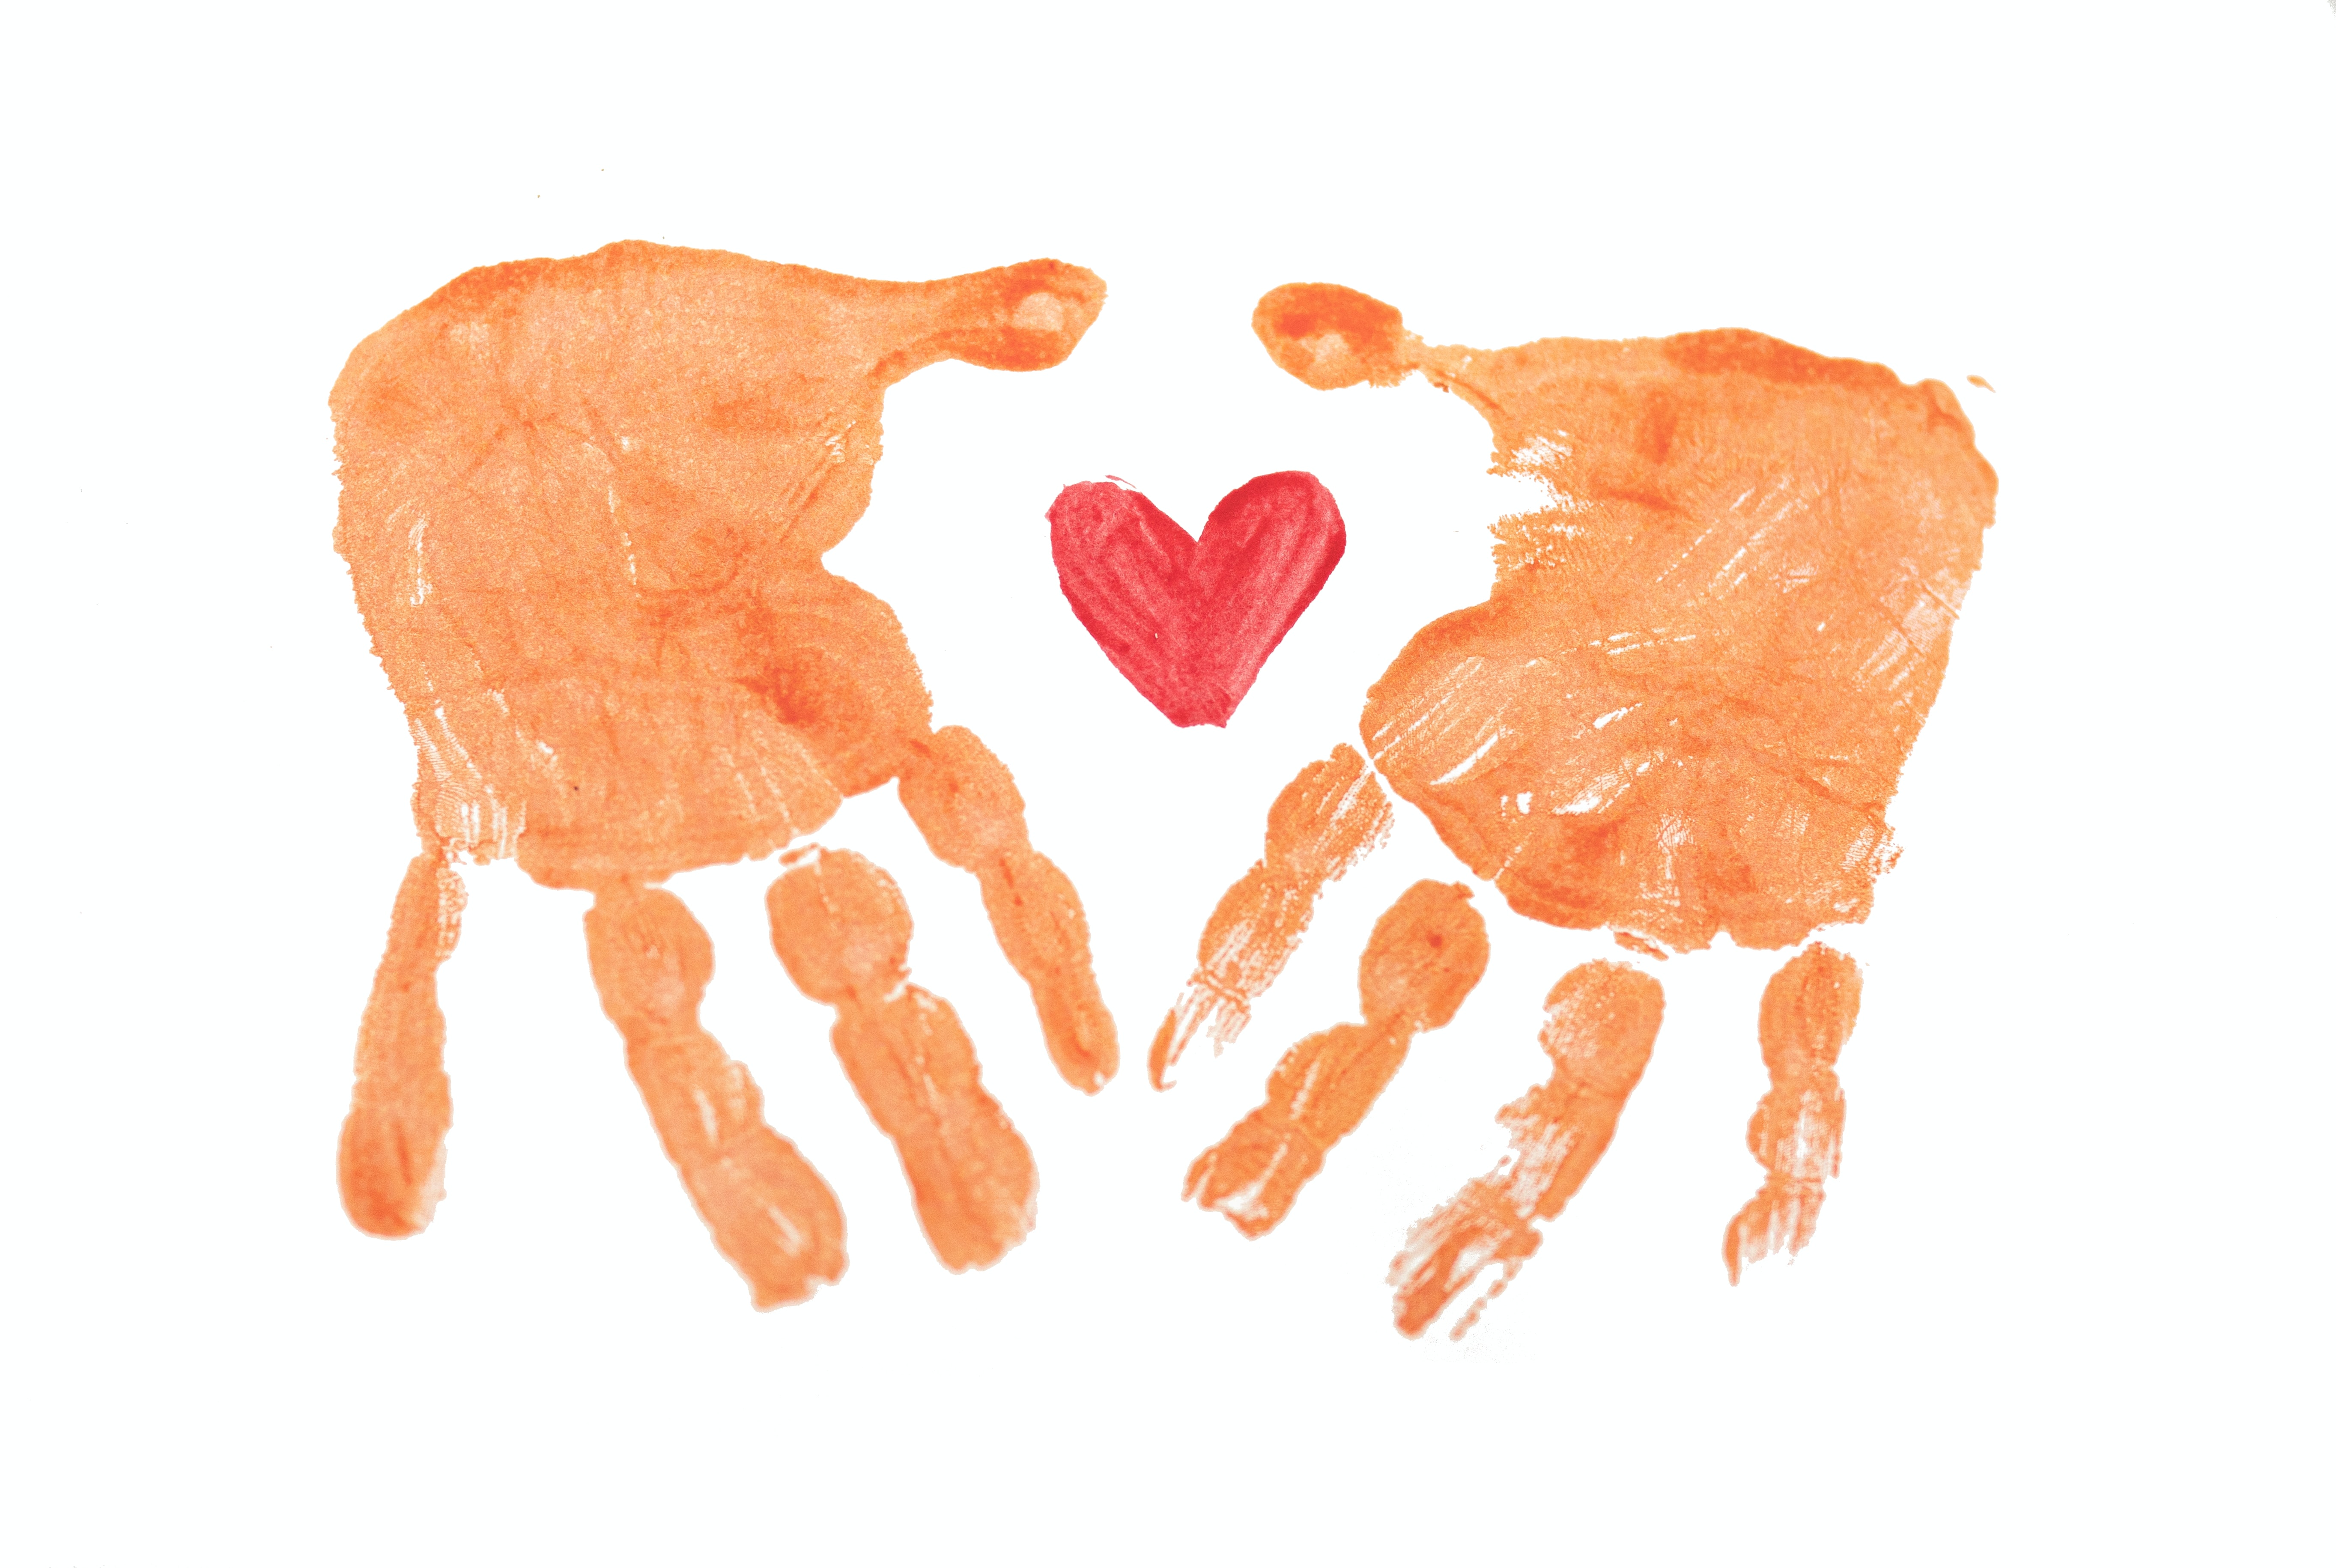 Two orange handprints with a red heart inside